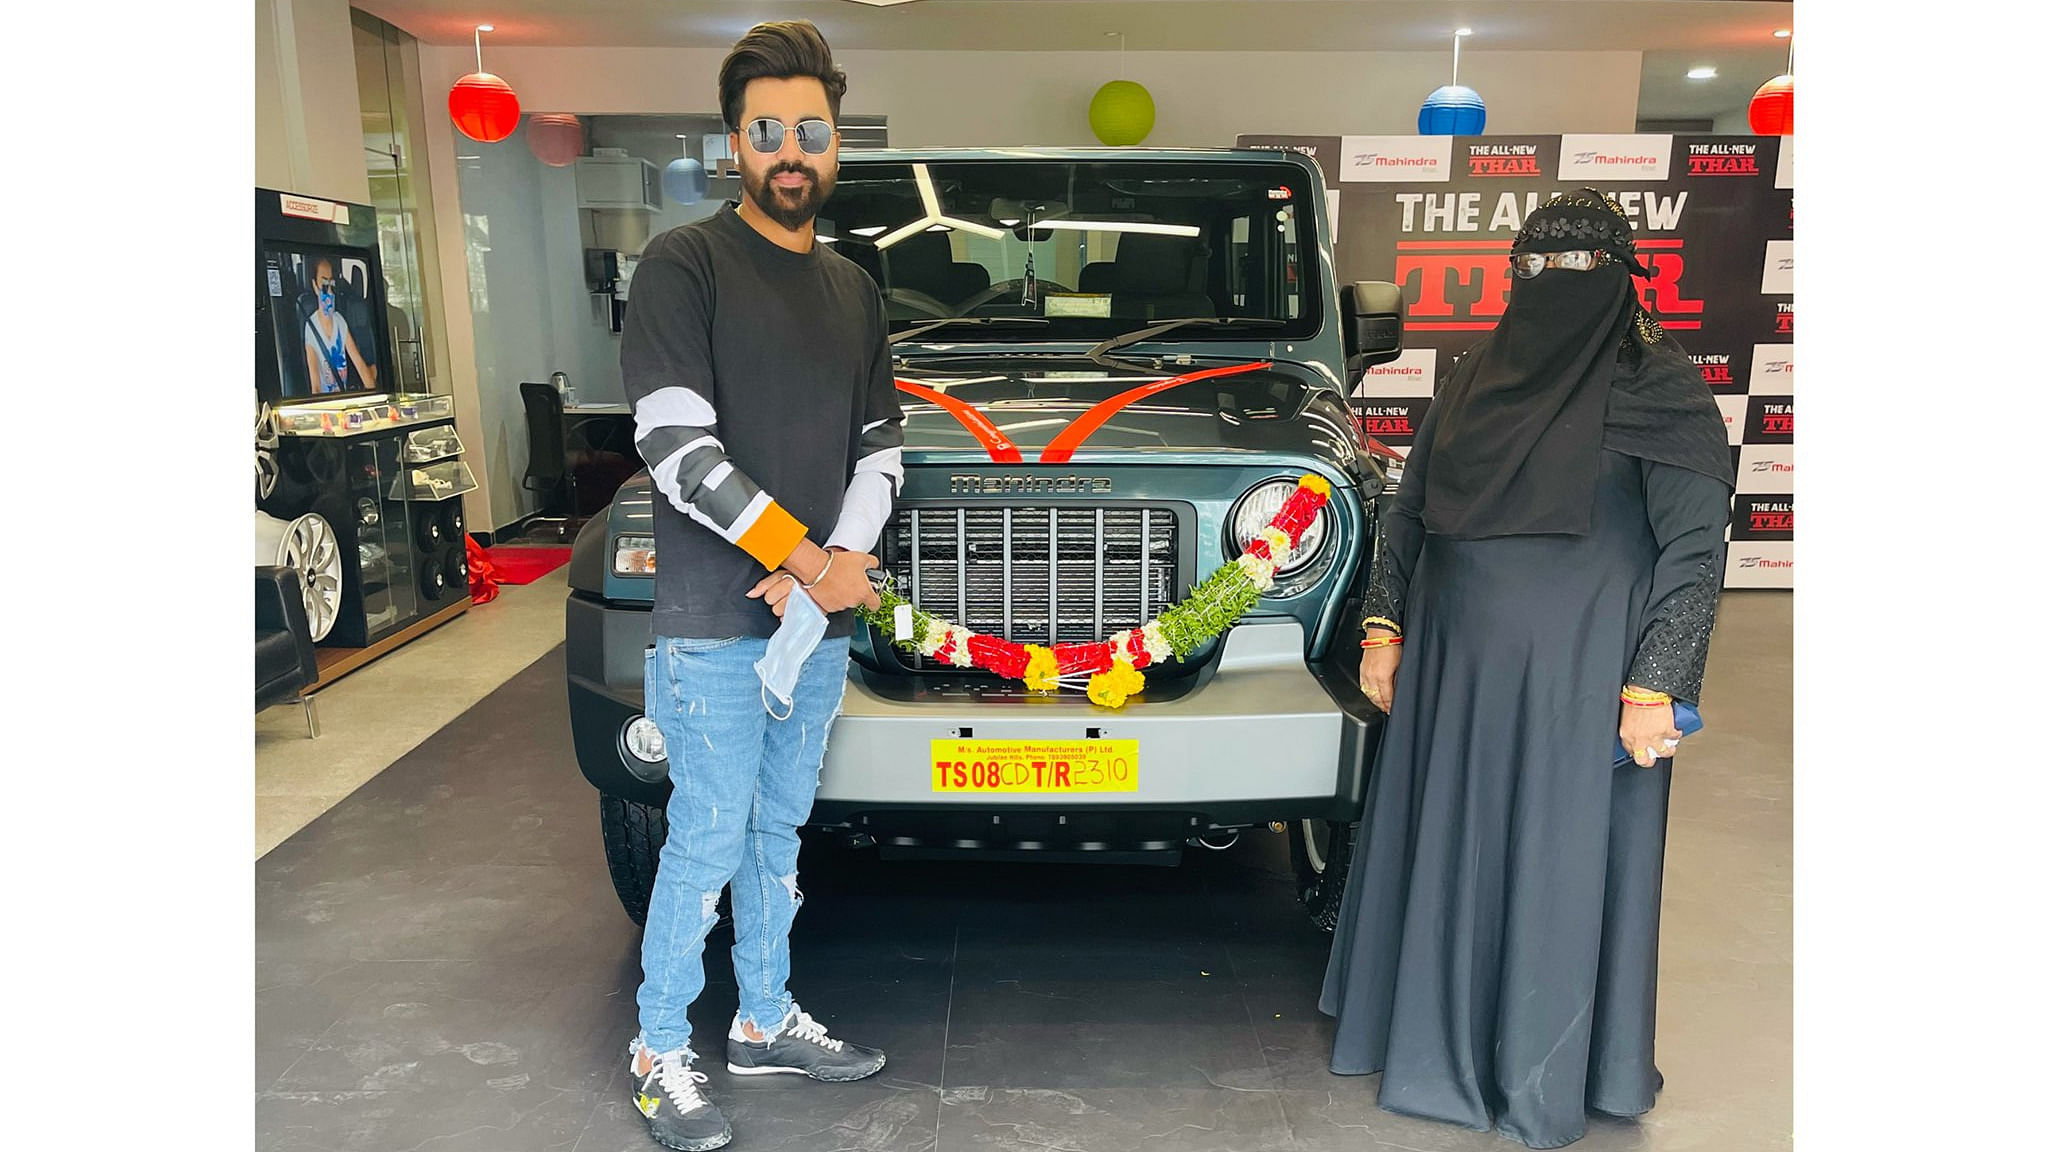 Mohammed Siraj took to social media to thank Anand Mahindra for the gesture and also shared a picture of his brother and mother receiving the car since he was on IPL duty. Credit: Twitter/ @mdsirajofficial 